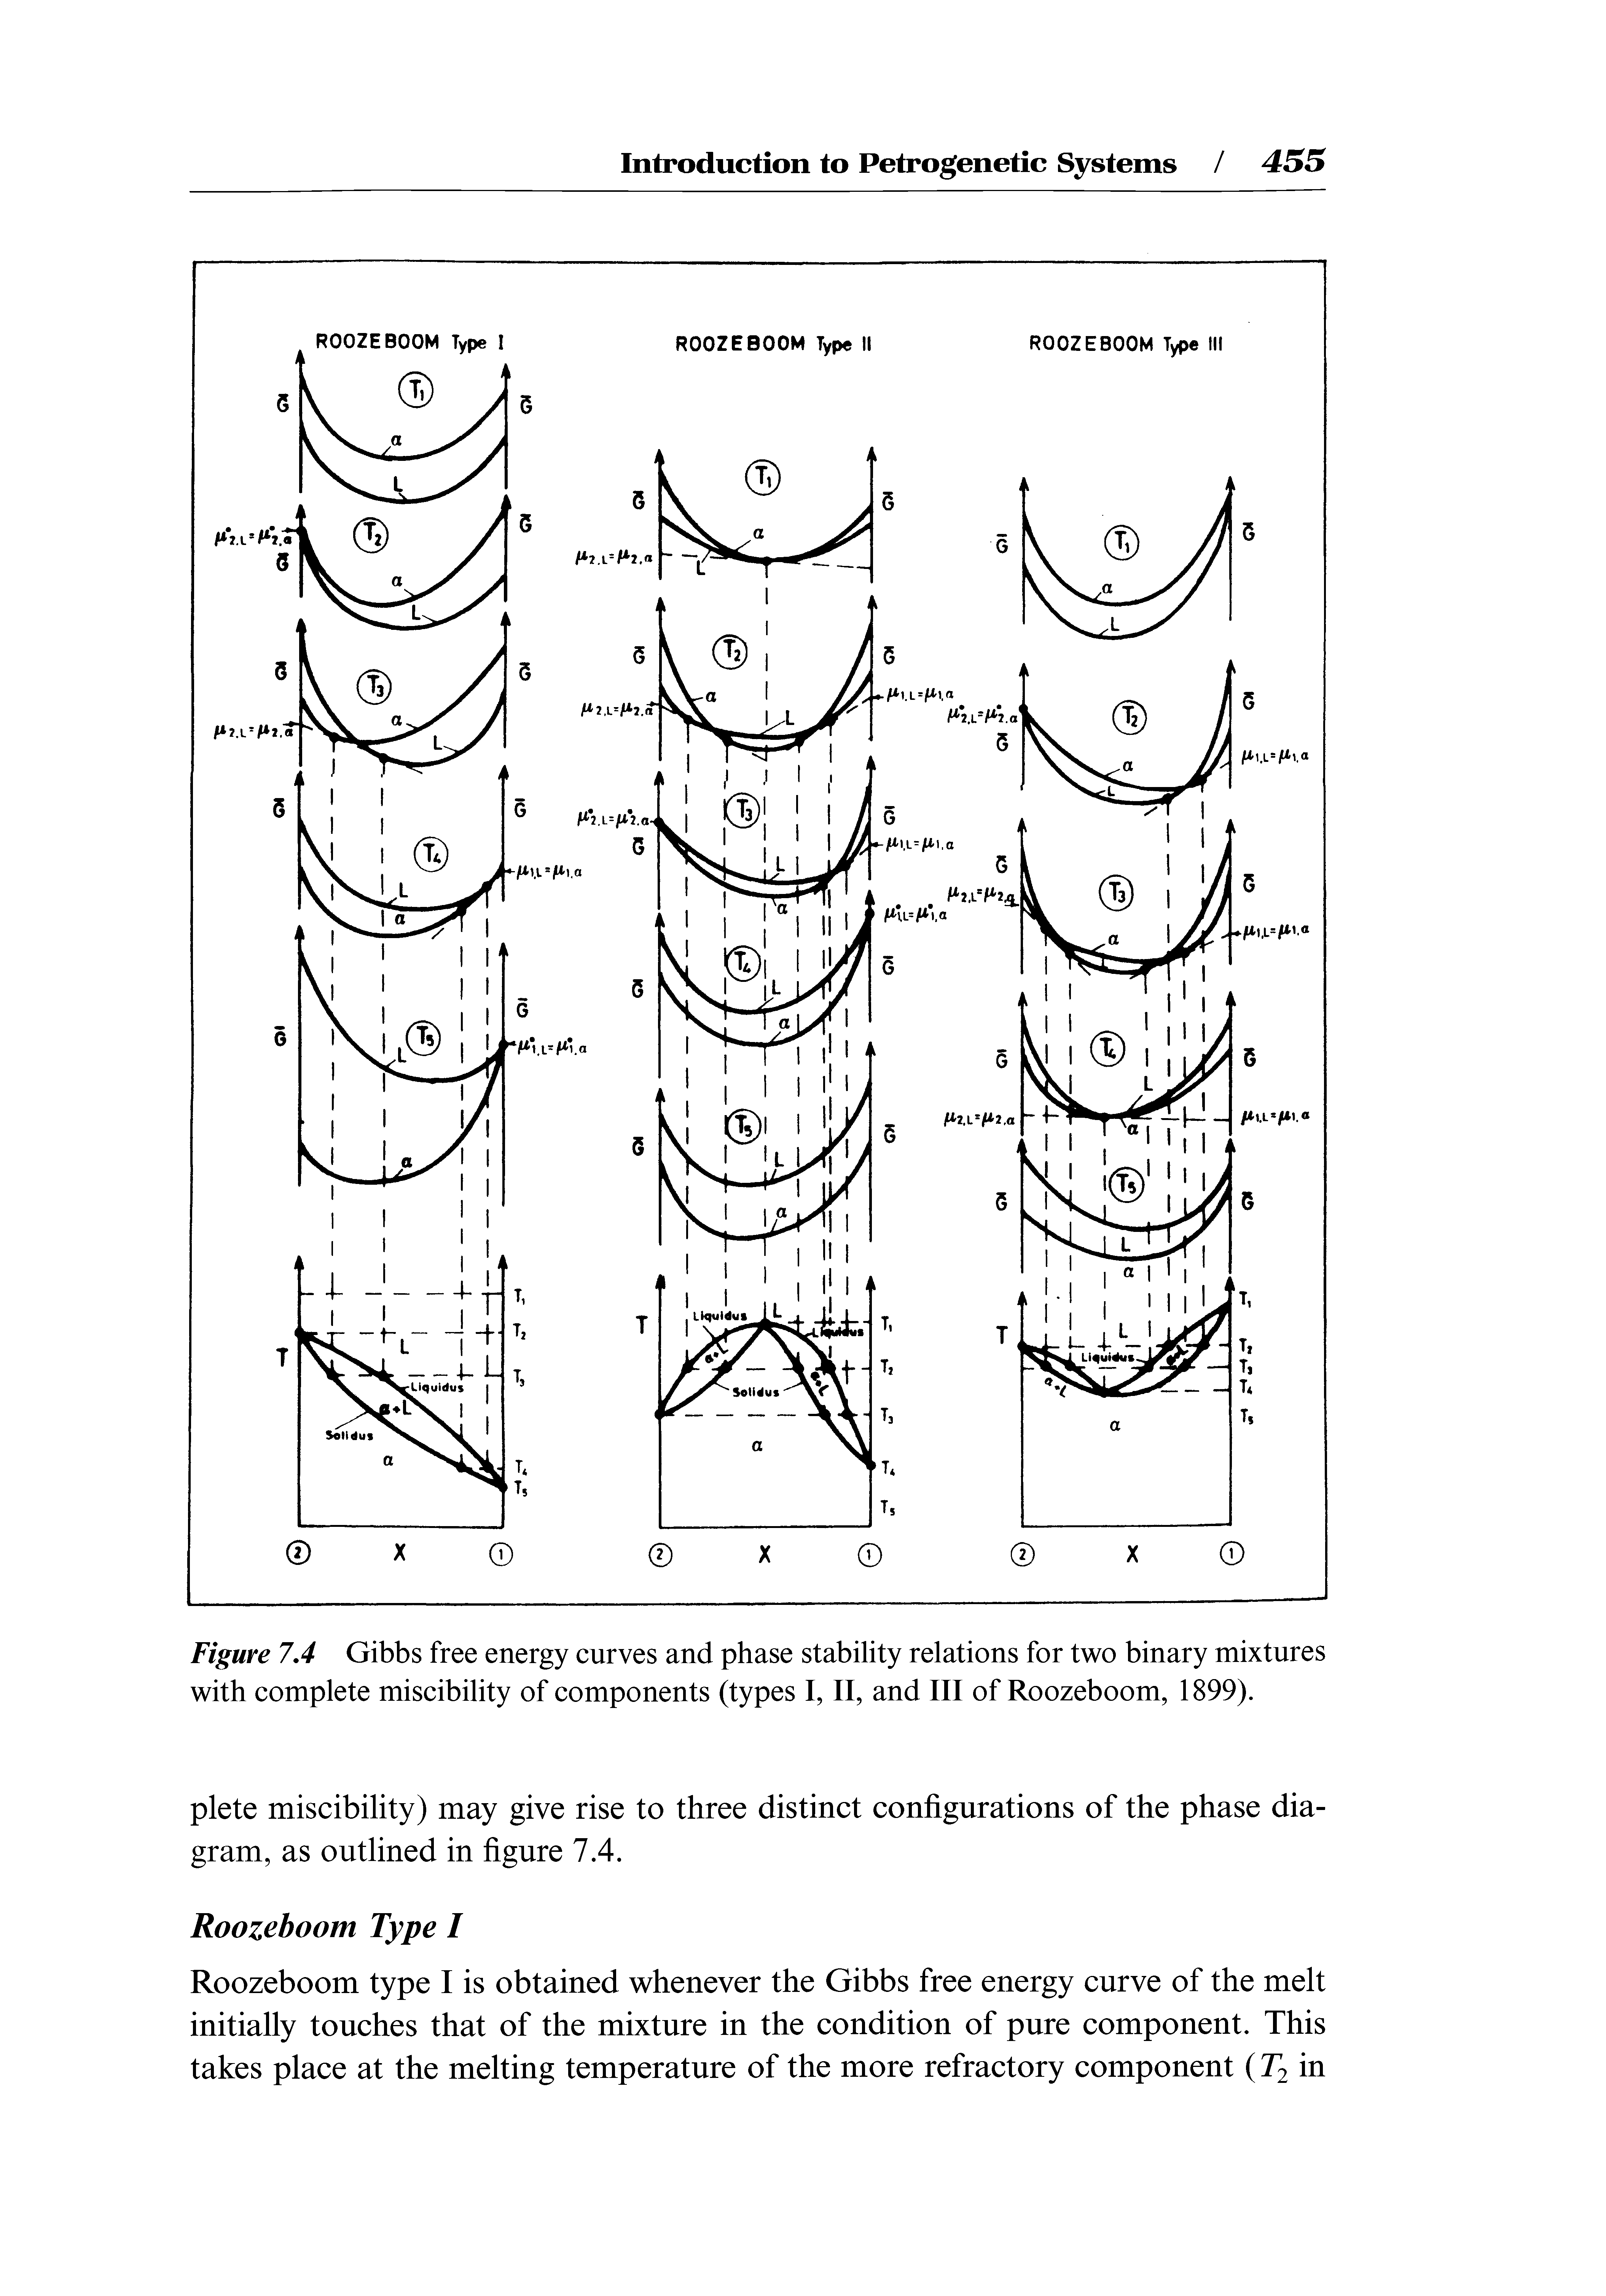 Figure 7.4 Gibbs free energy curves and phase stability relations for two binary mixtures with complete miscibility of components (types I, II, and III of Roozeboom, 1899).